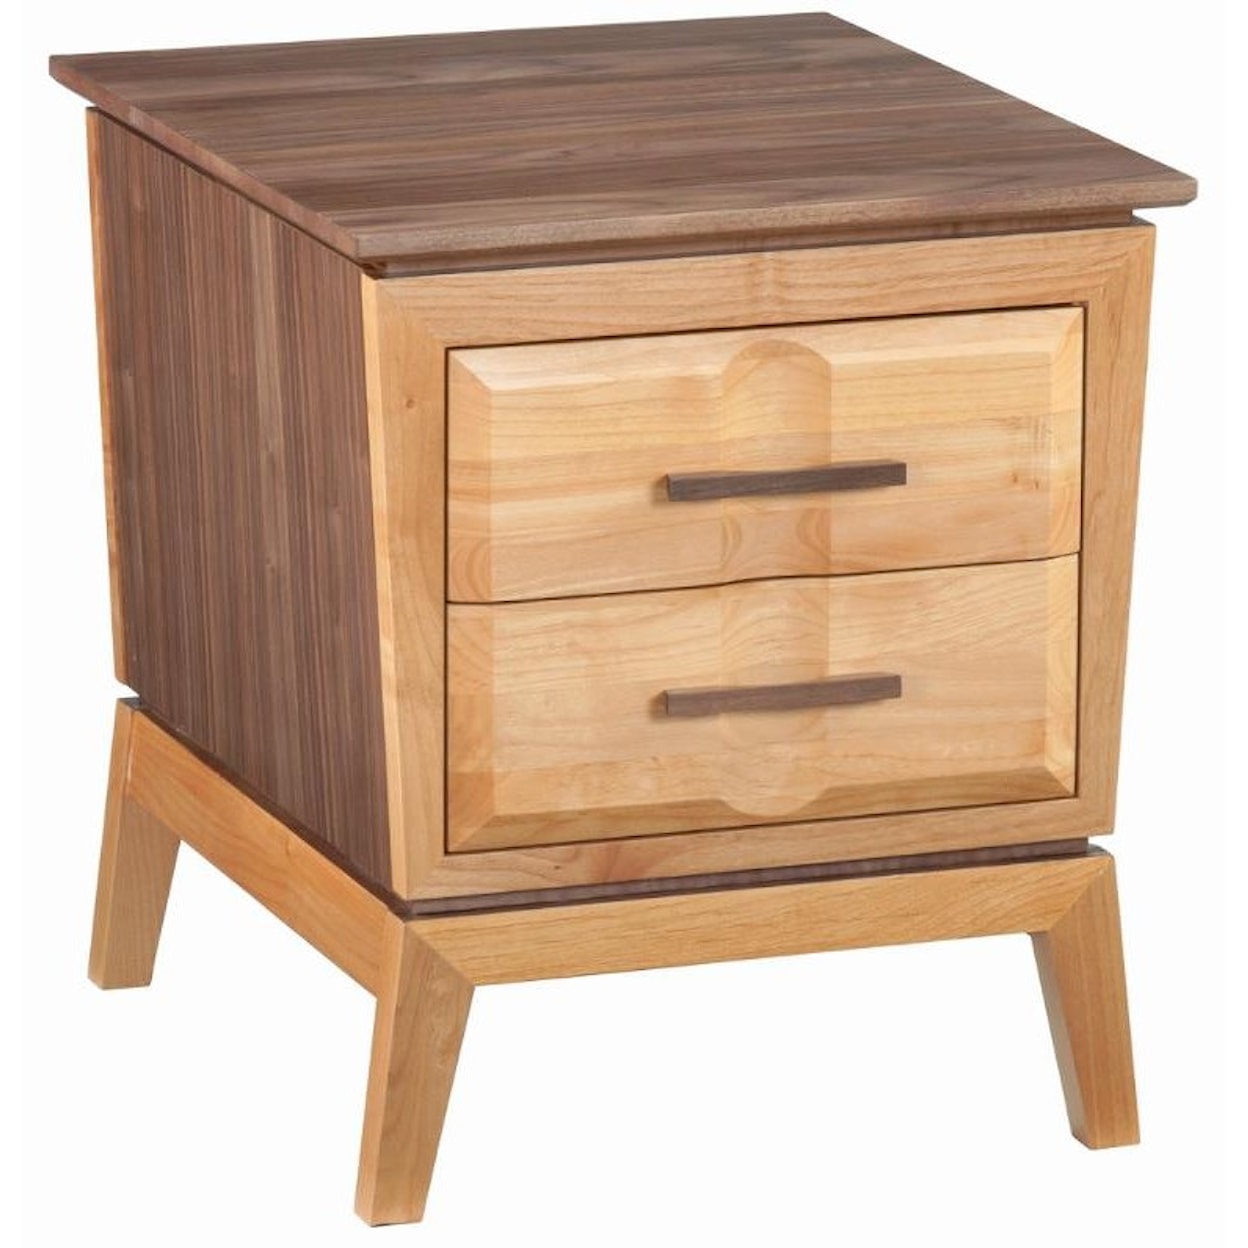 Whittier Wood Addison End Table